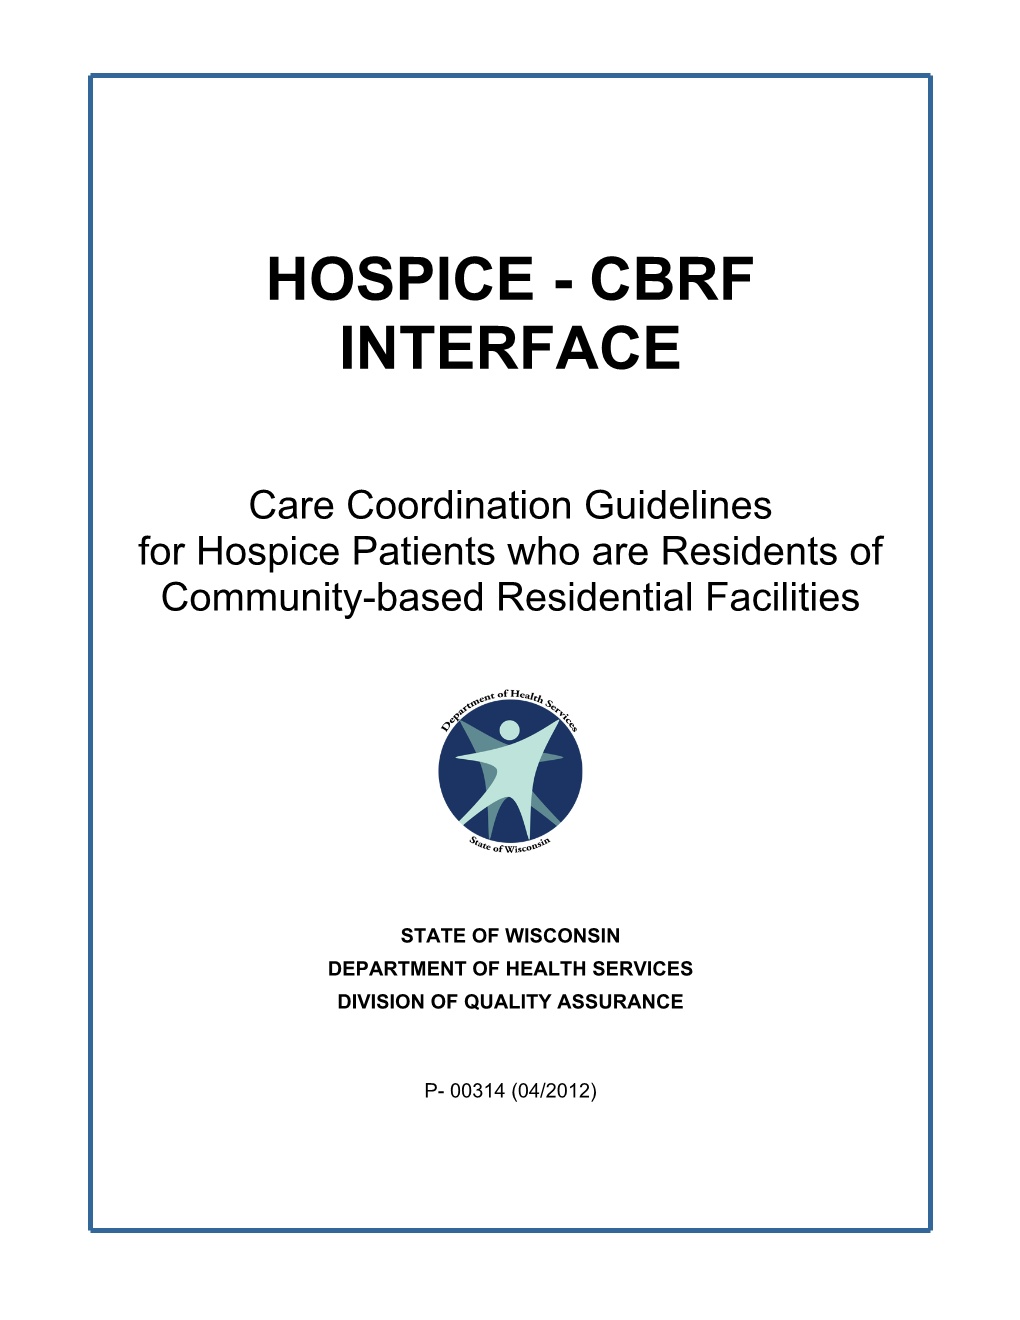 CBRF and Hospice Interface, P-00314